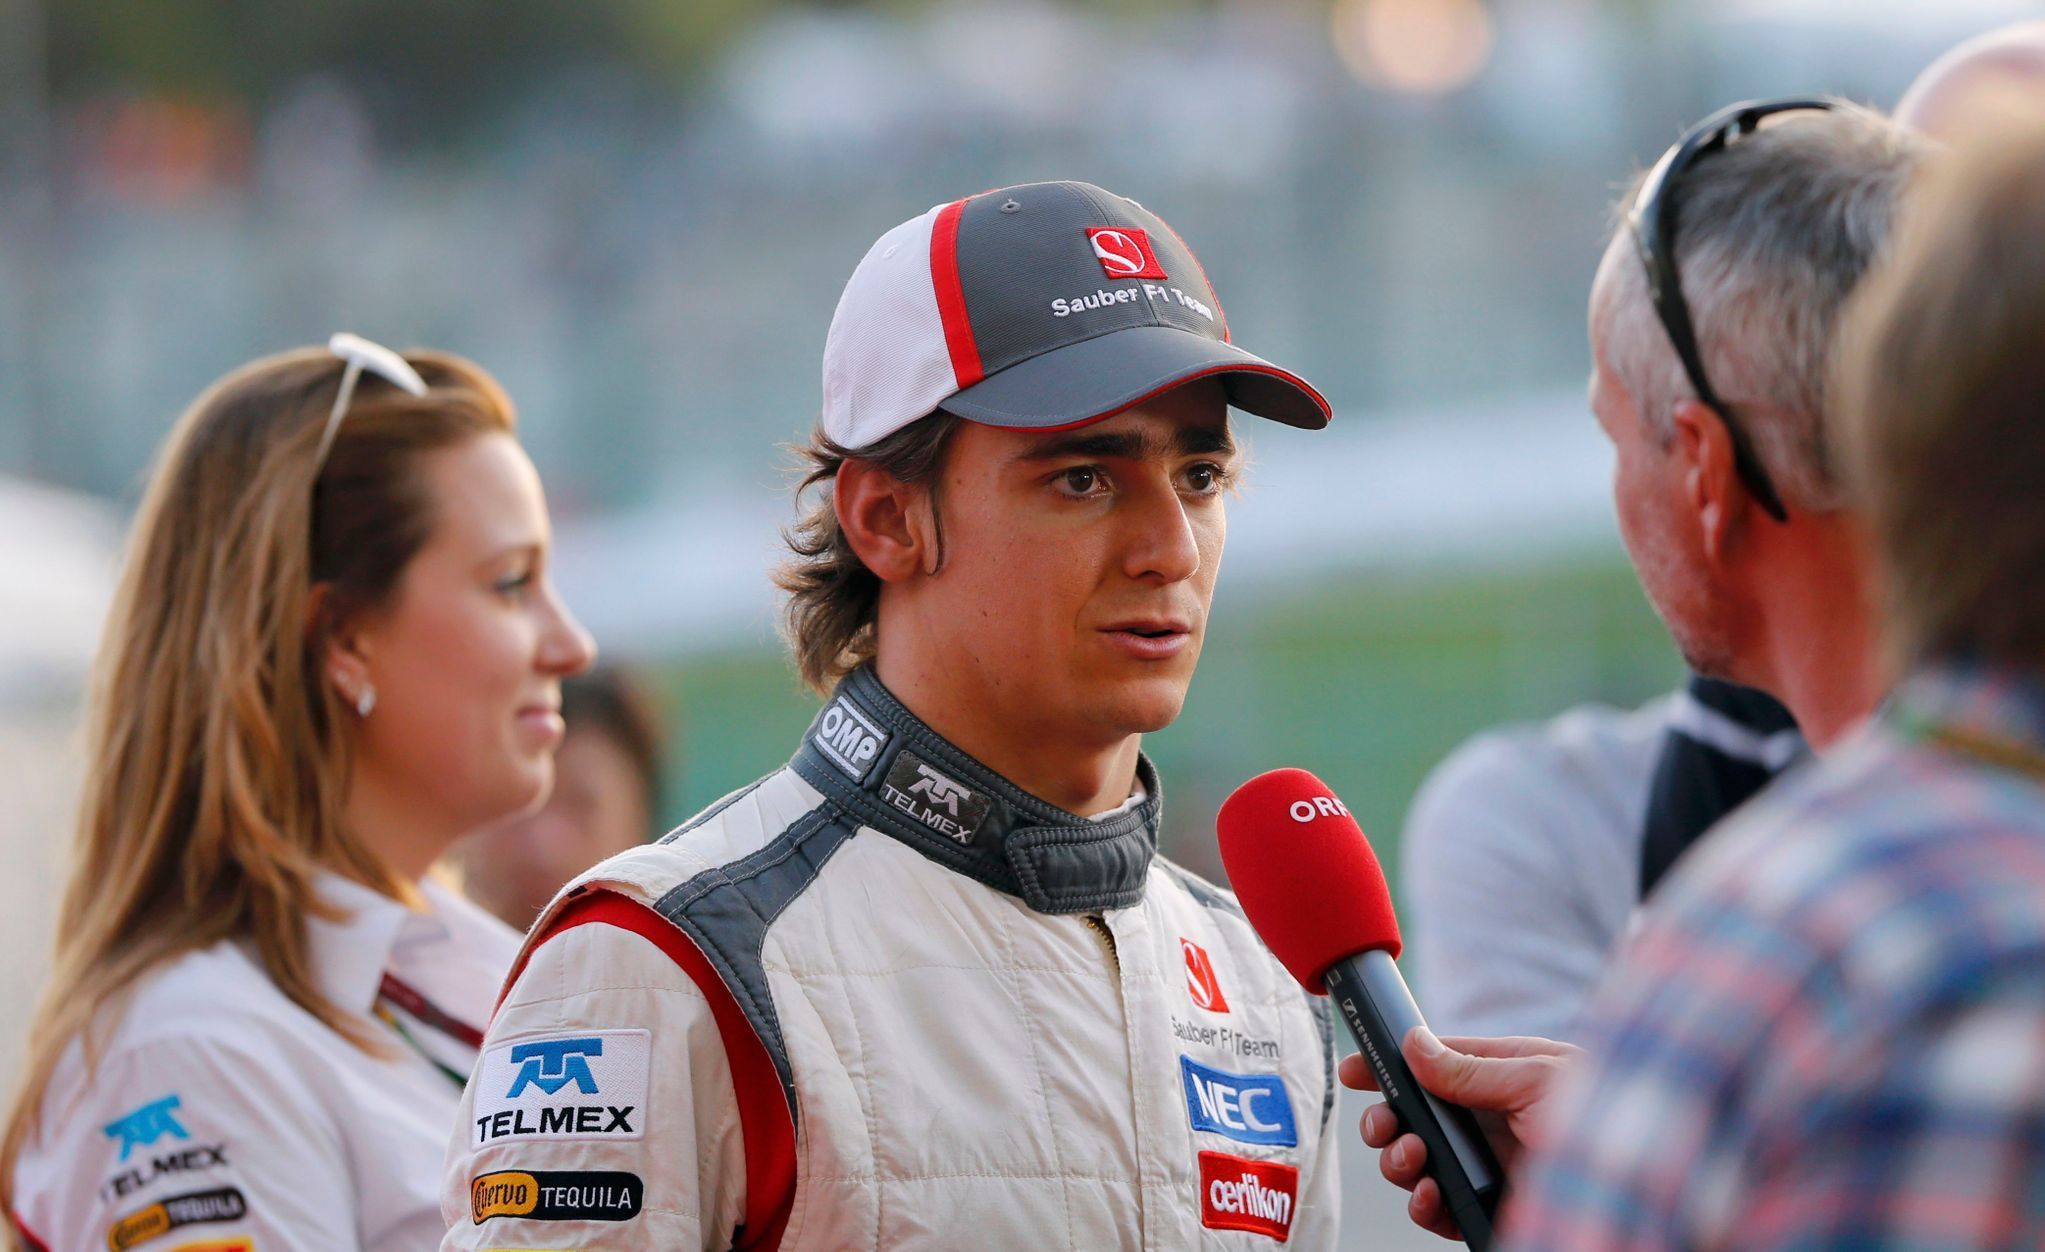 Sauber Formula One driver Gutierrez of Mexico talks to the media after the Japanese F1 Grand Prix at the Suzuka circuit